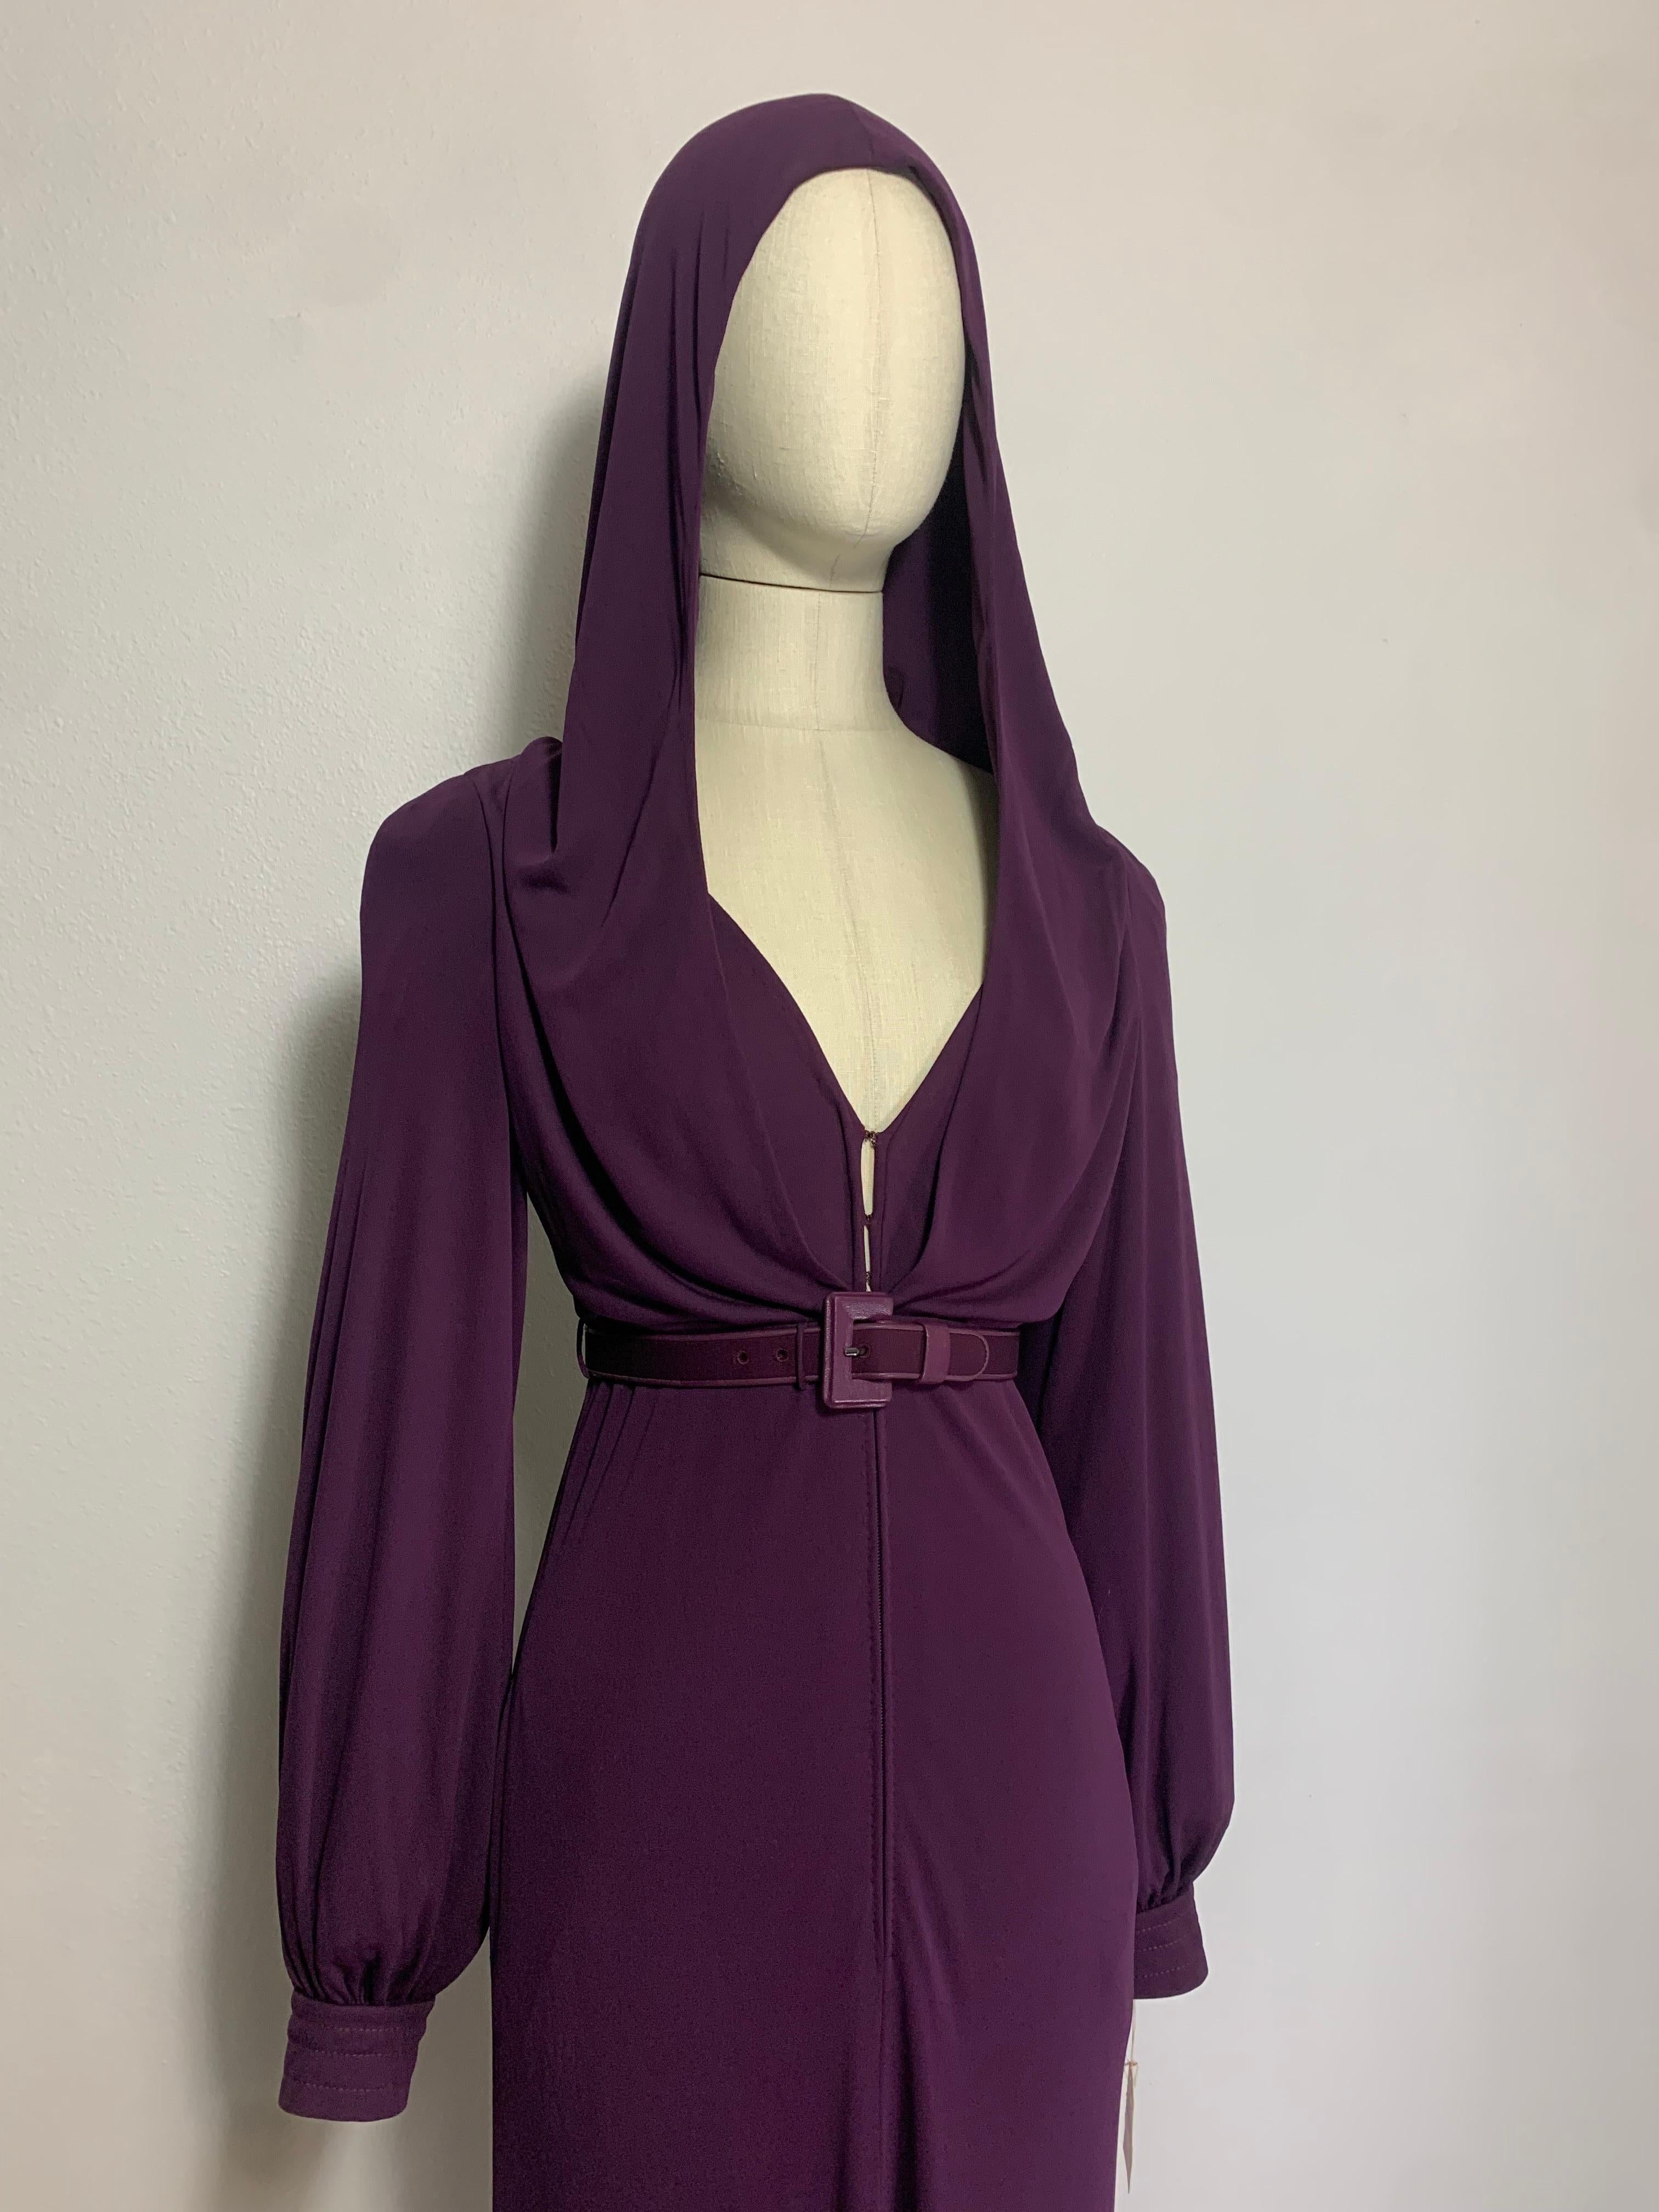 1975 James Galanos Dramatic Aubergine Jersey Maxi Gown w Fabulous Draped Hood In New Condition For Sale In Gresham, OR